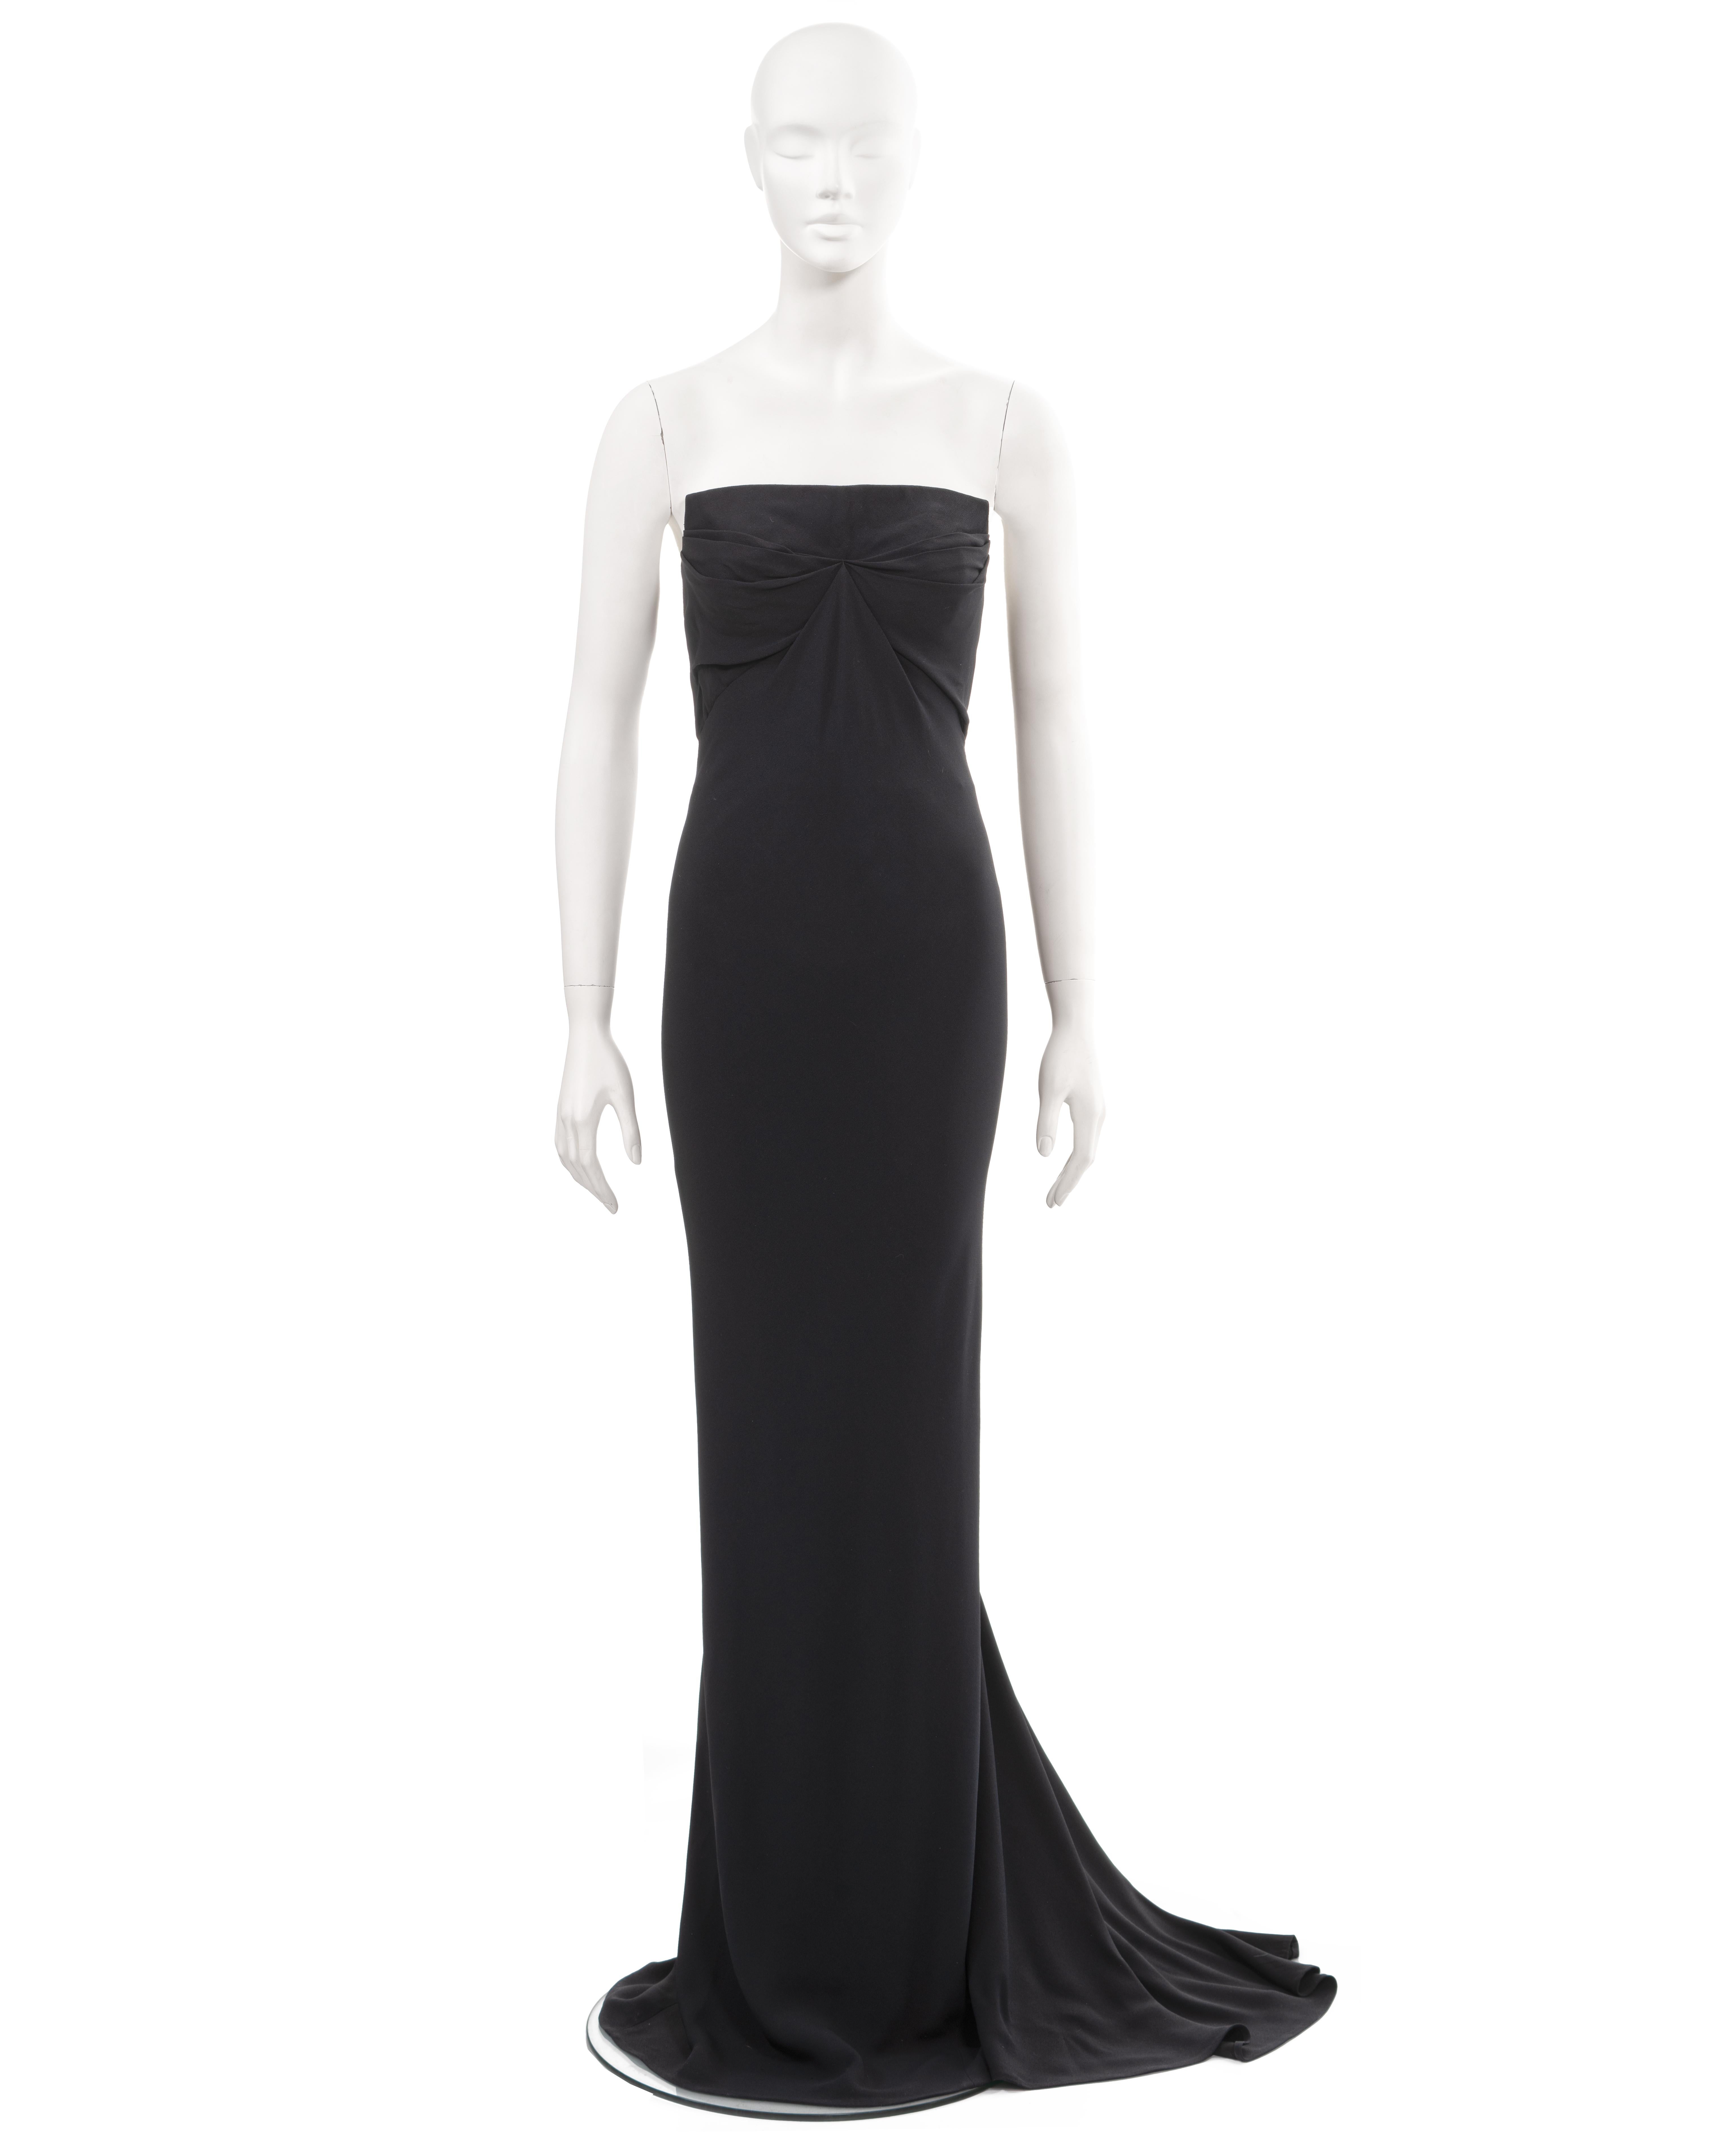 Givenchy by John Galliano black strapless evening dress and lace bolero, ss 1997 For Sale 5